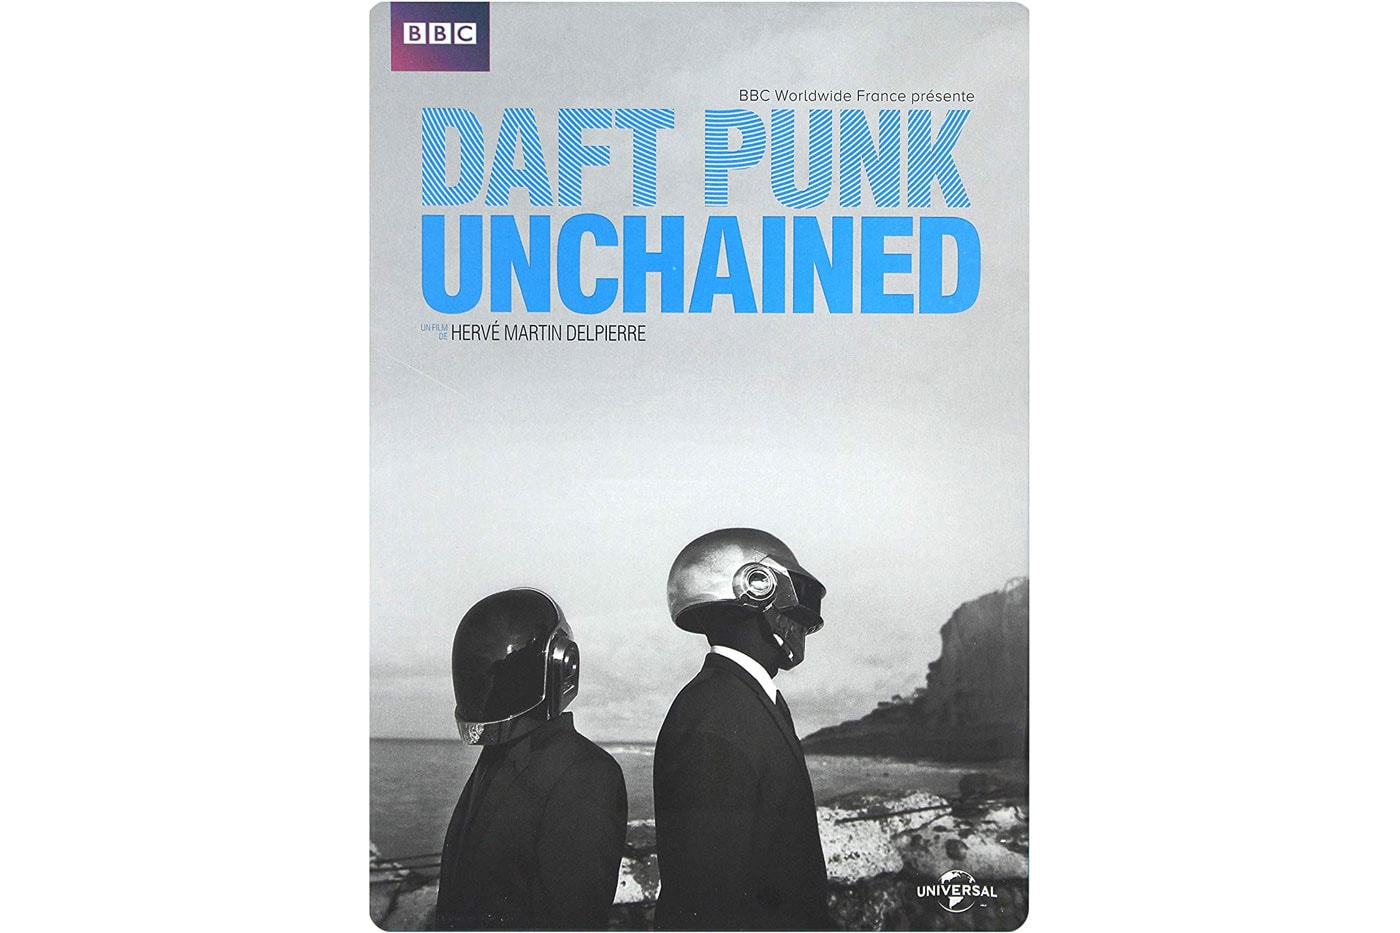 Watch the Trailer for 'Daft Punk Unchained'